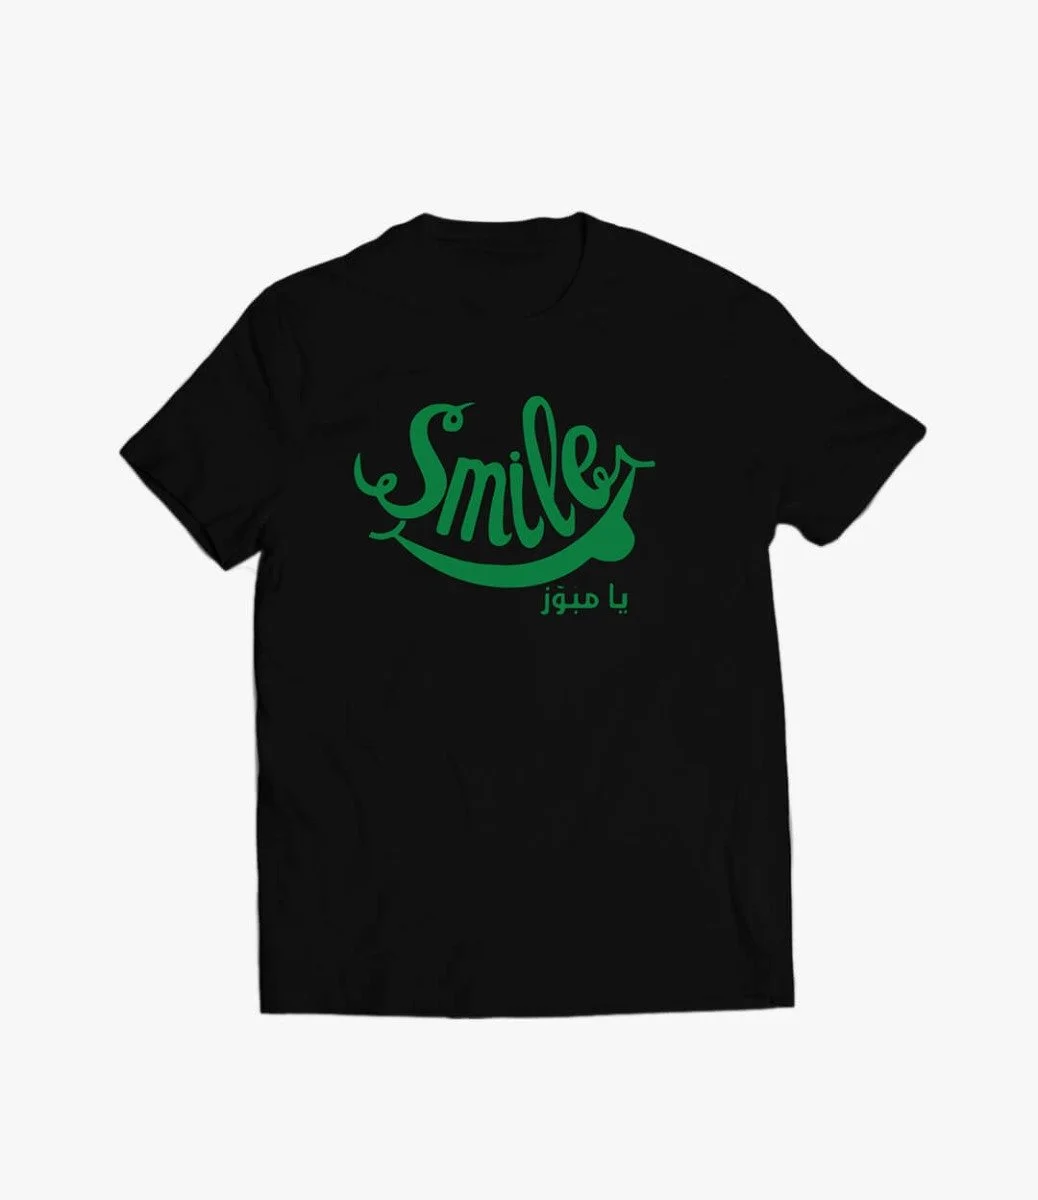 Men's Black Printed T-shirt with Writing Smile